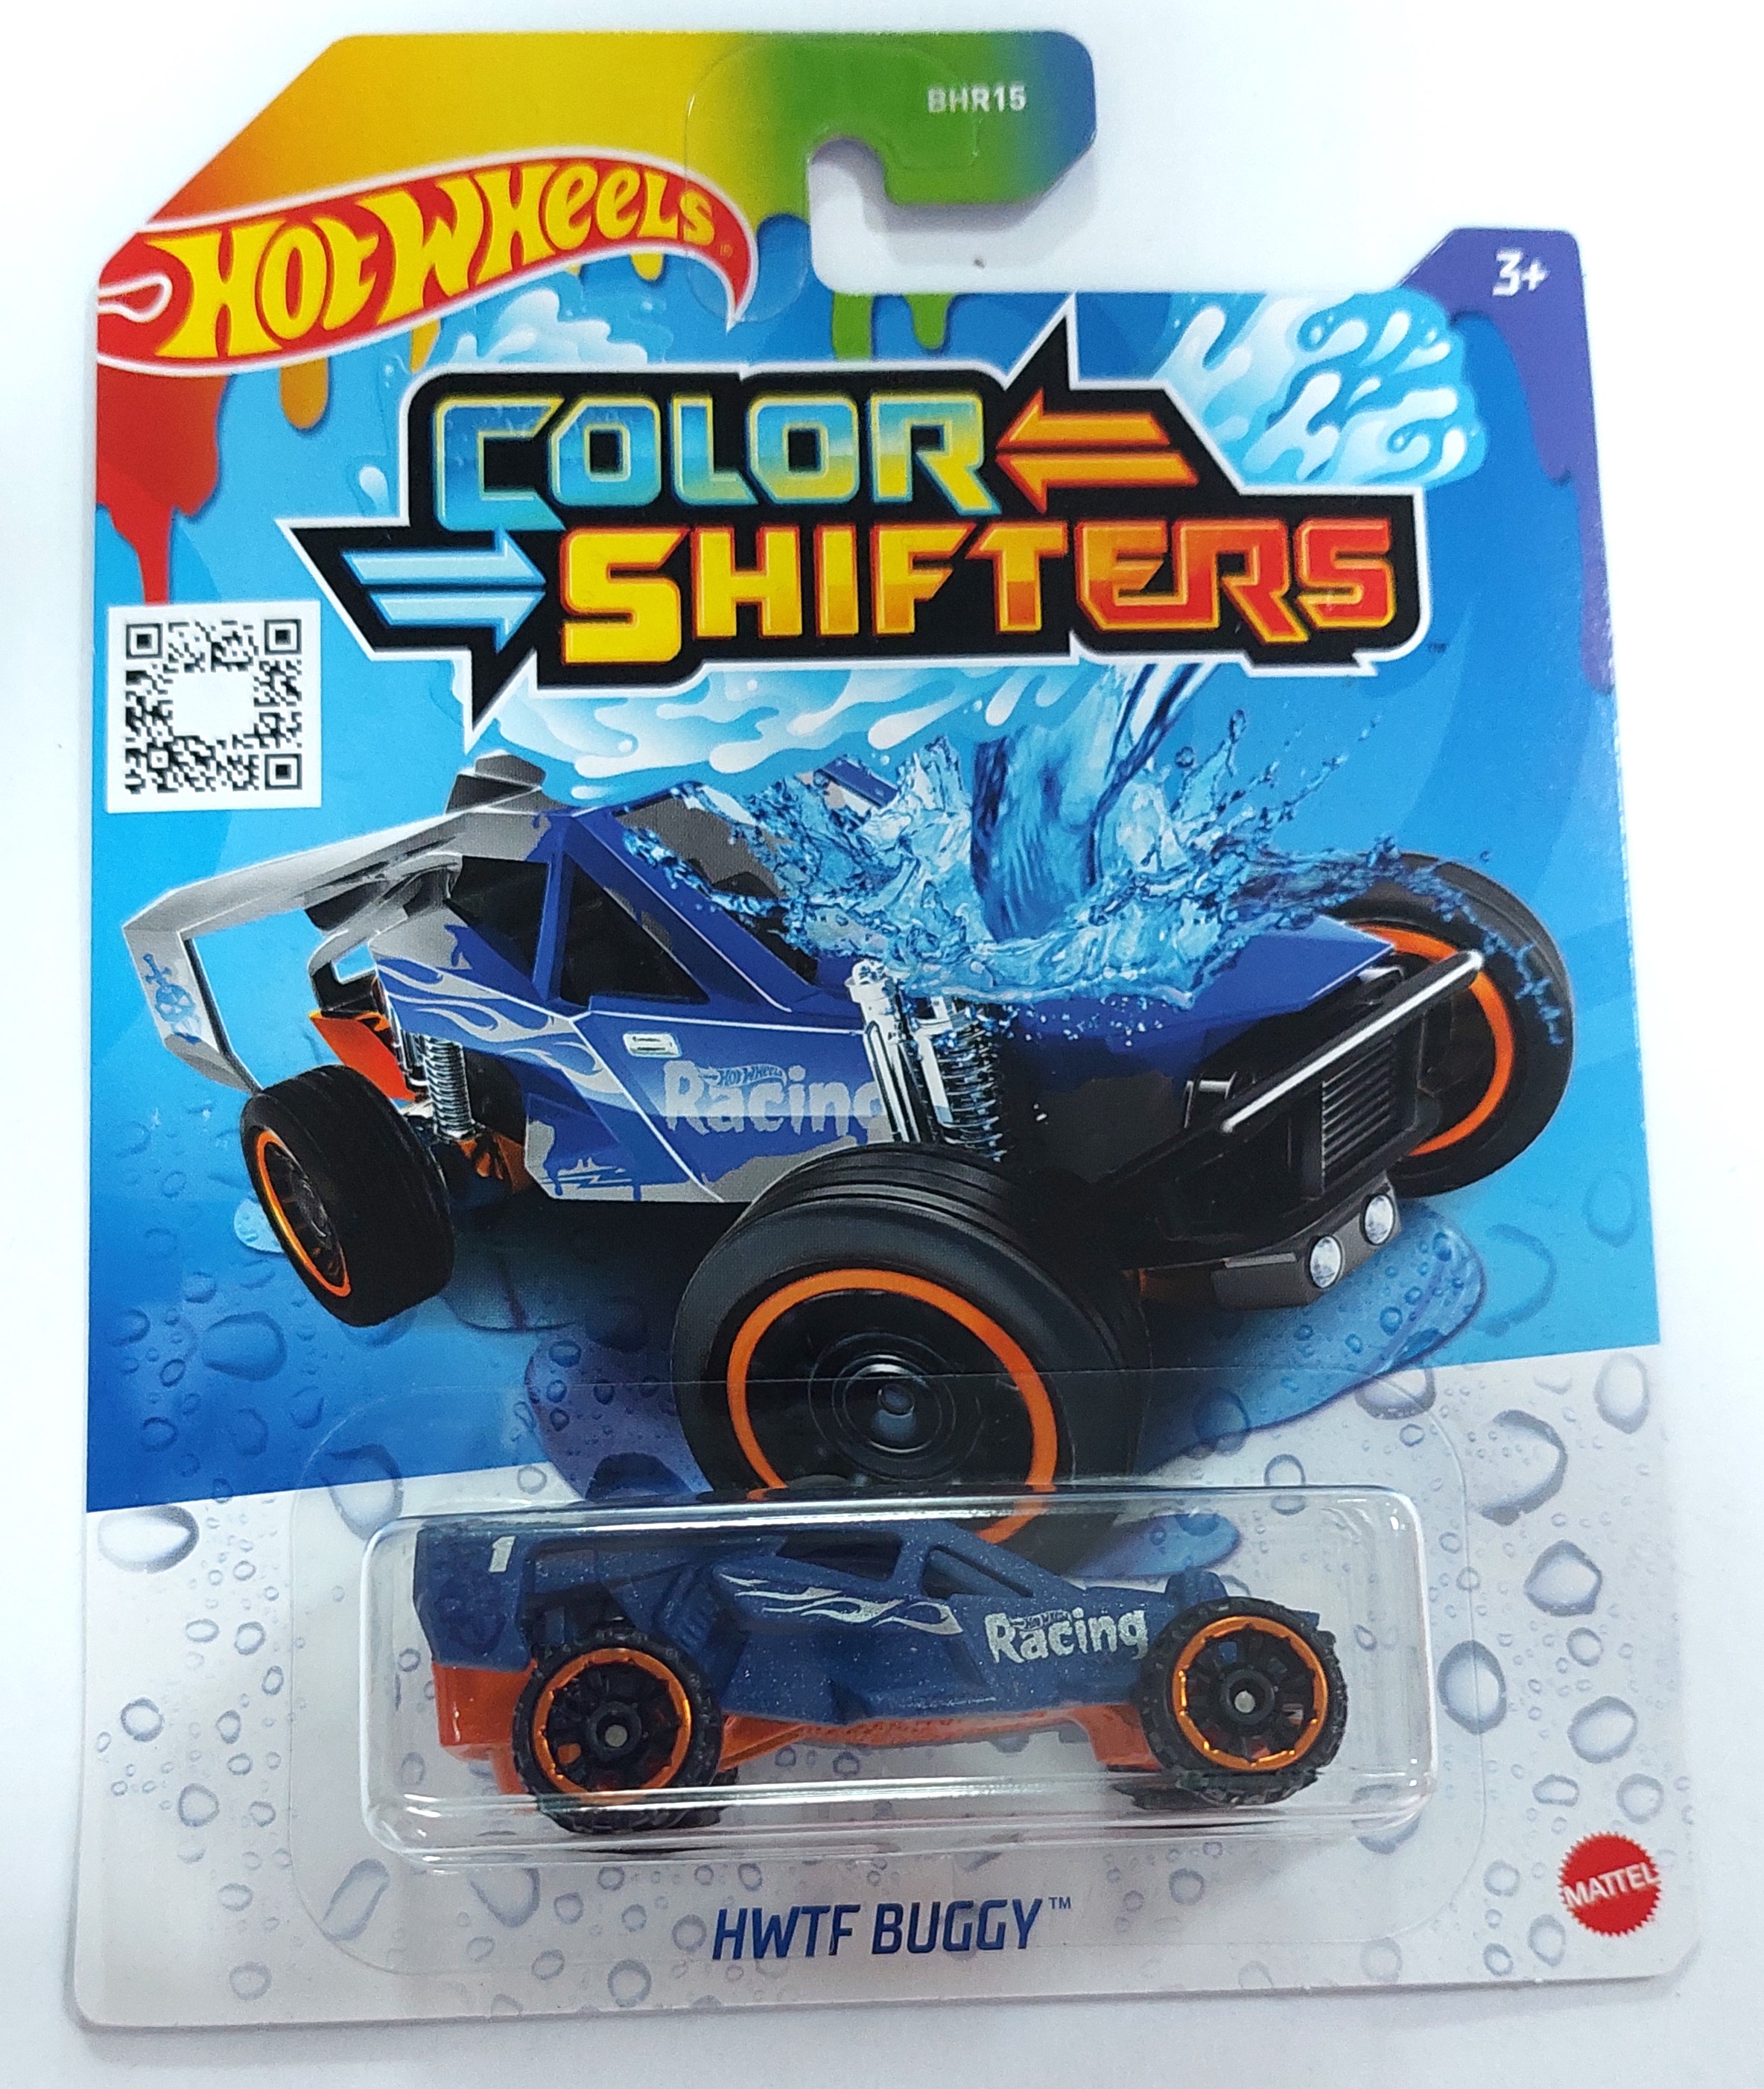 Машинка Hot Wheels Bhr15 Color Shifters Hwtf Buggy, Cfm36-la15 машинка hot wheels color shifters fish d